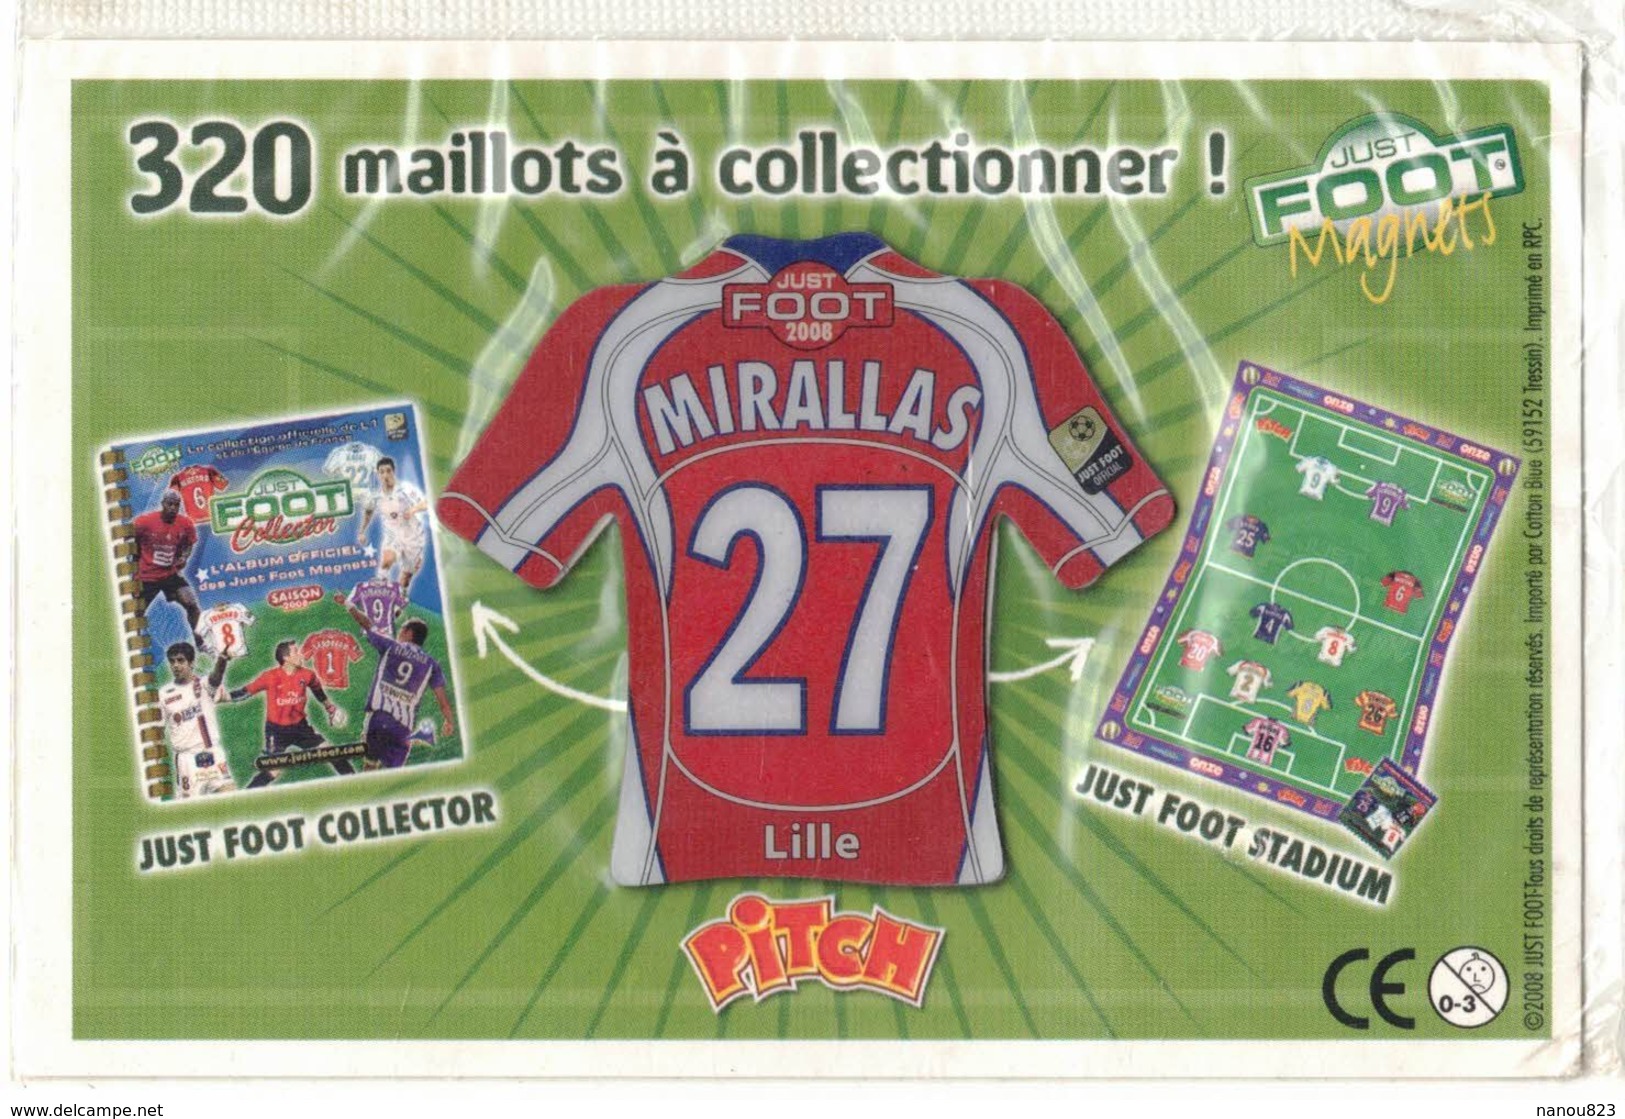 FOOTBALL ANNEE 2008 MAGNETS PUBLICITAIRE  JUST PITCH FOOT LILLE LOSC 27 JOUEUR MIRALLAS SOUS BLISTER - Sport